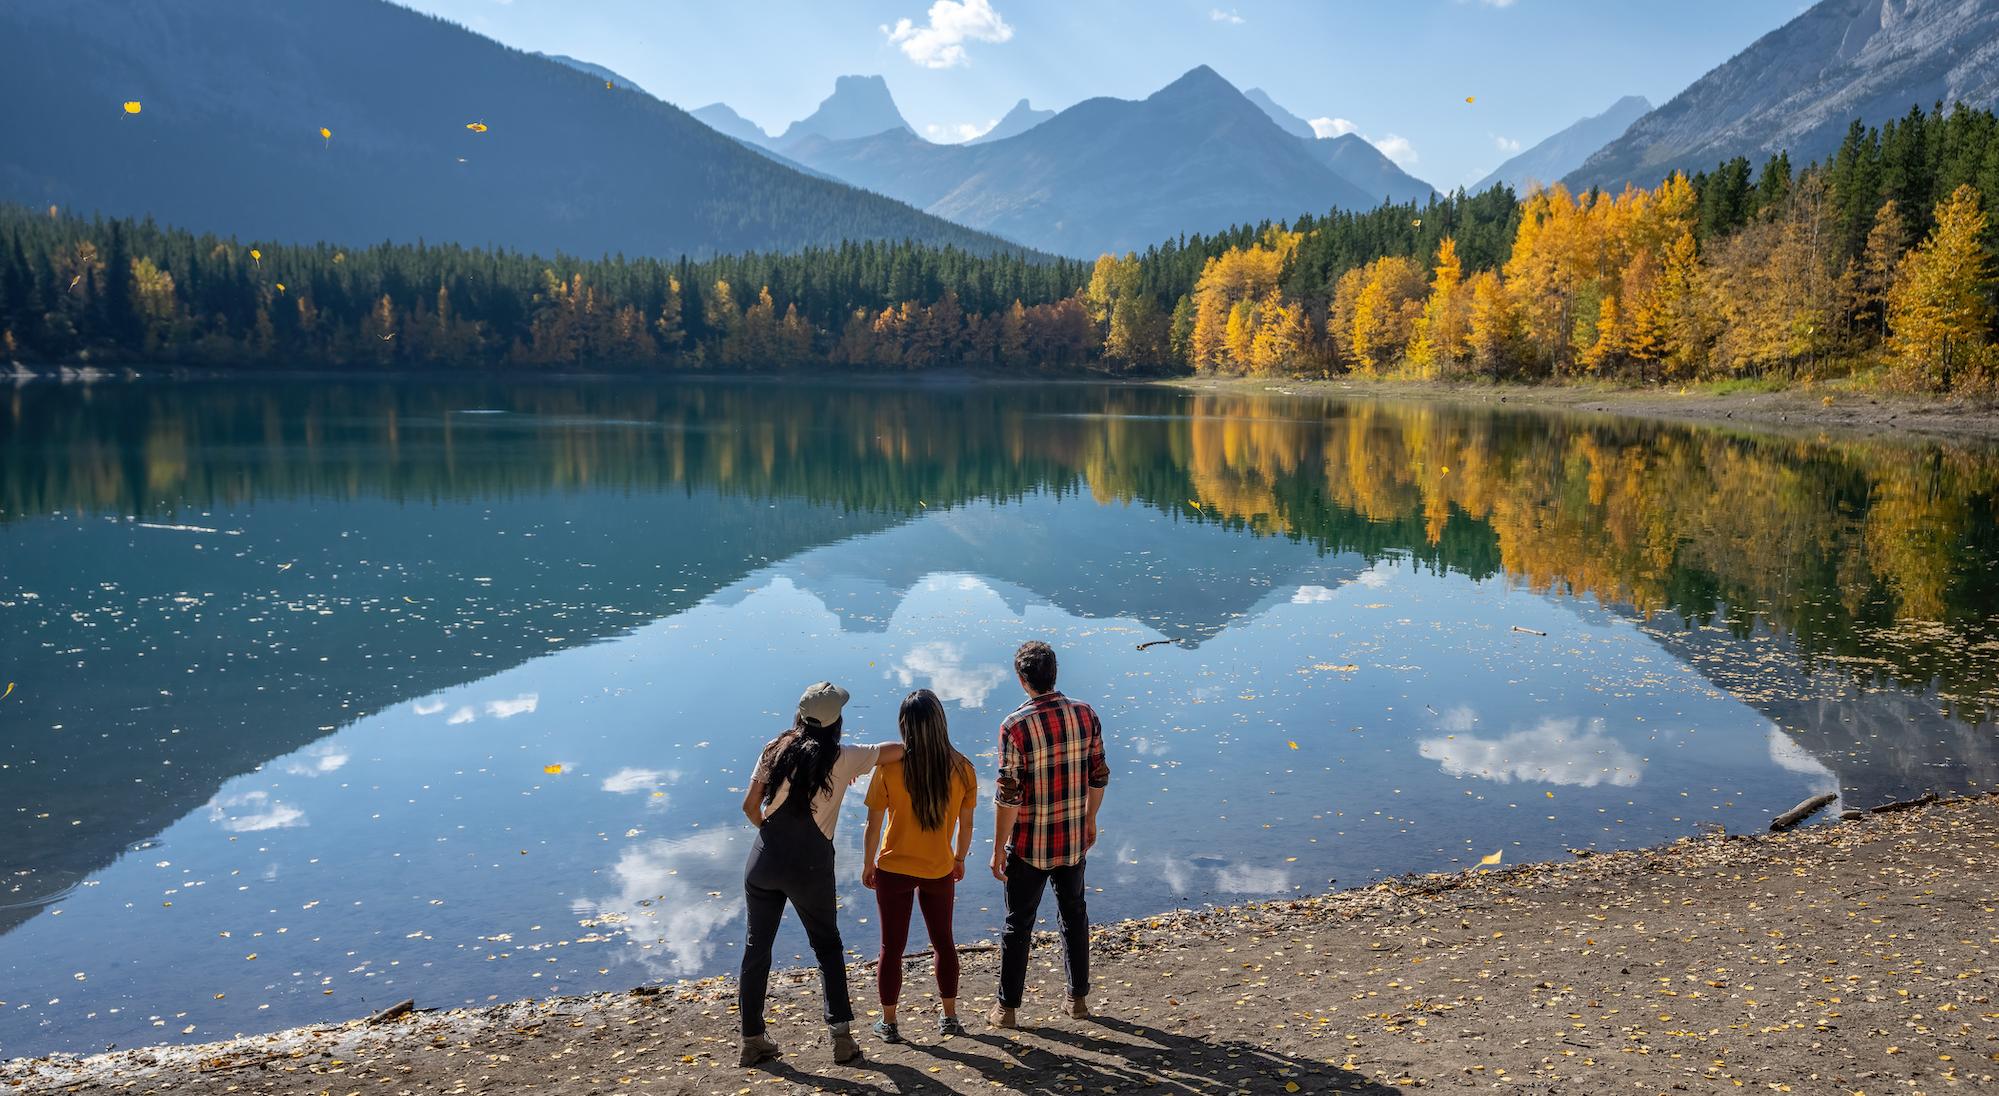 Three people standing on the edge of a lake surrounded by trees in fall colours and Rocky Mountains in the background.